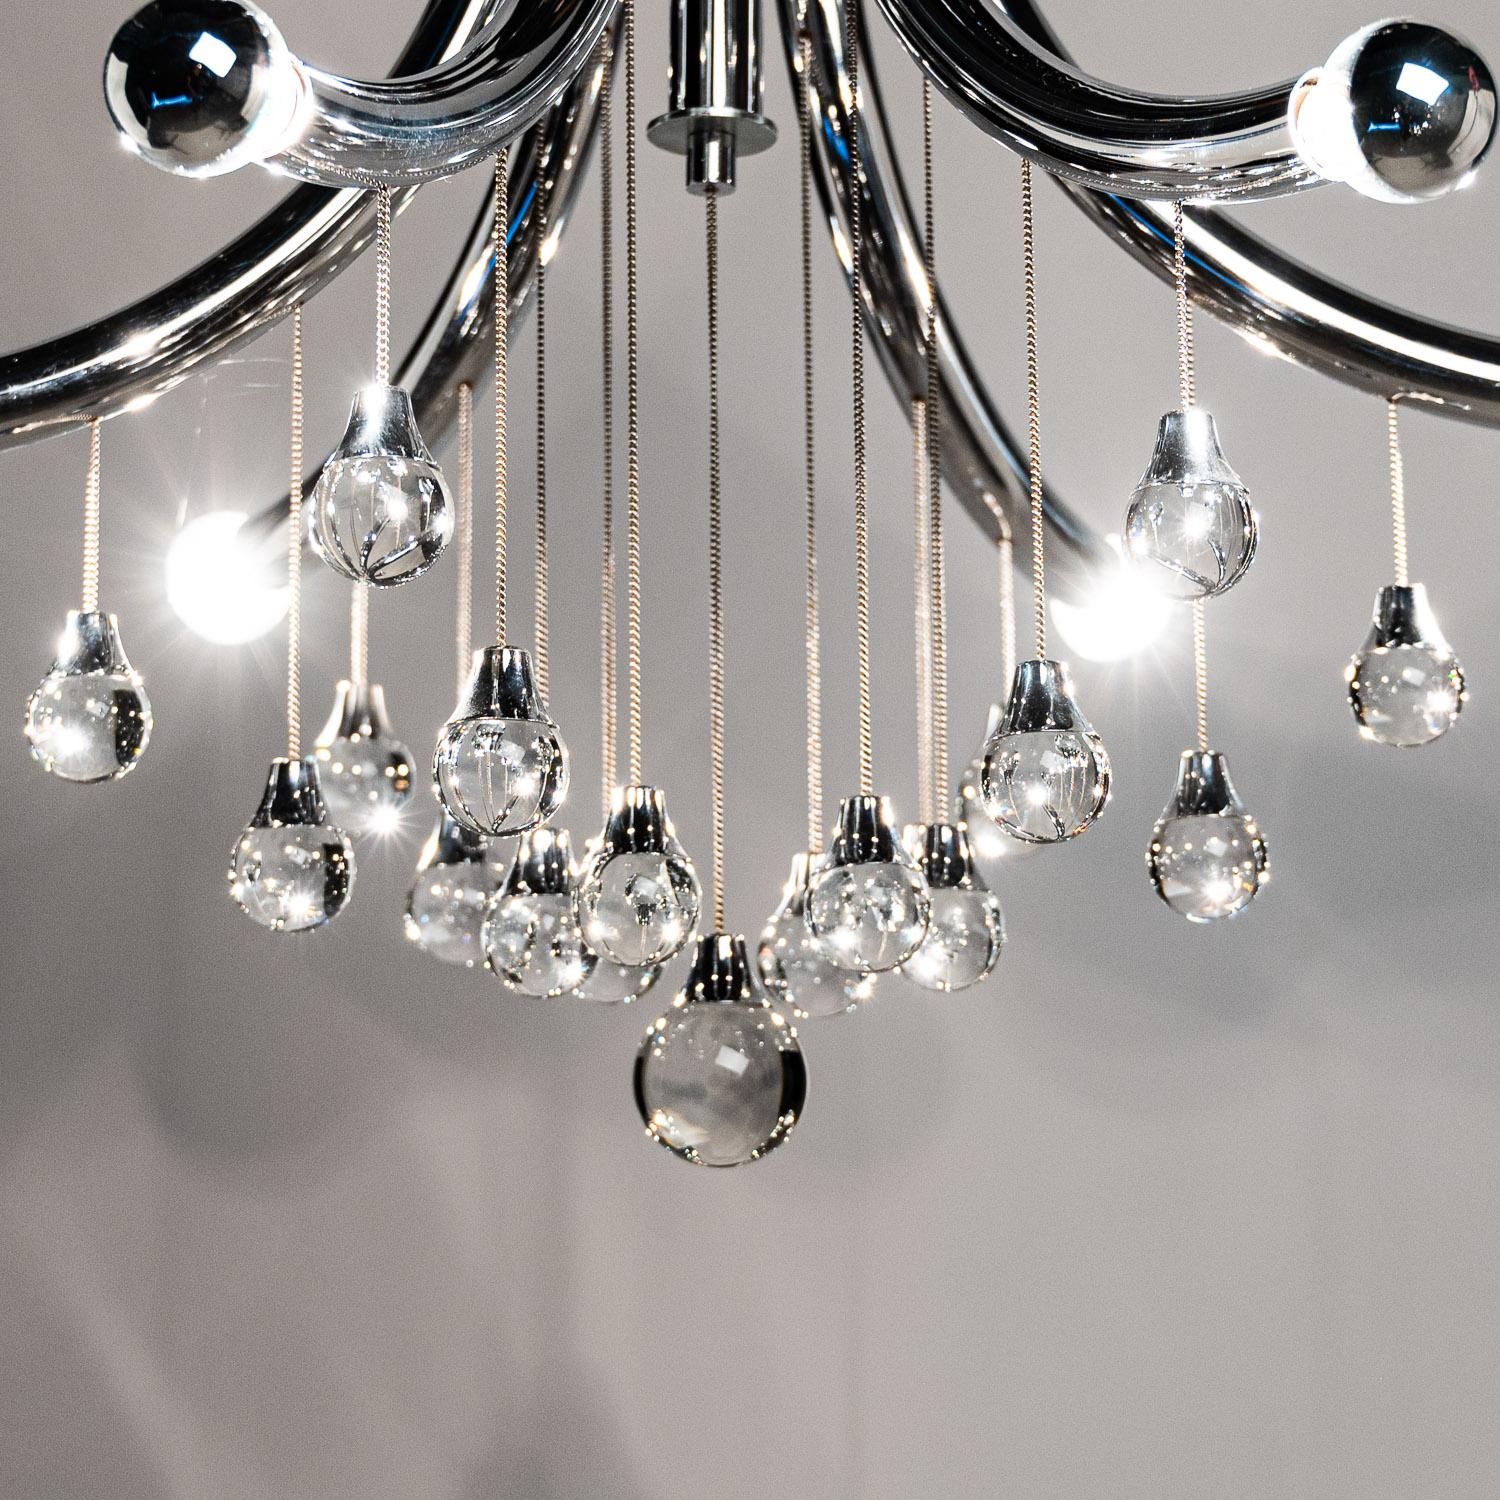 1970s Chrome and Glass Chandelier by Sciolari  For Sale 8